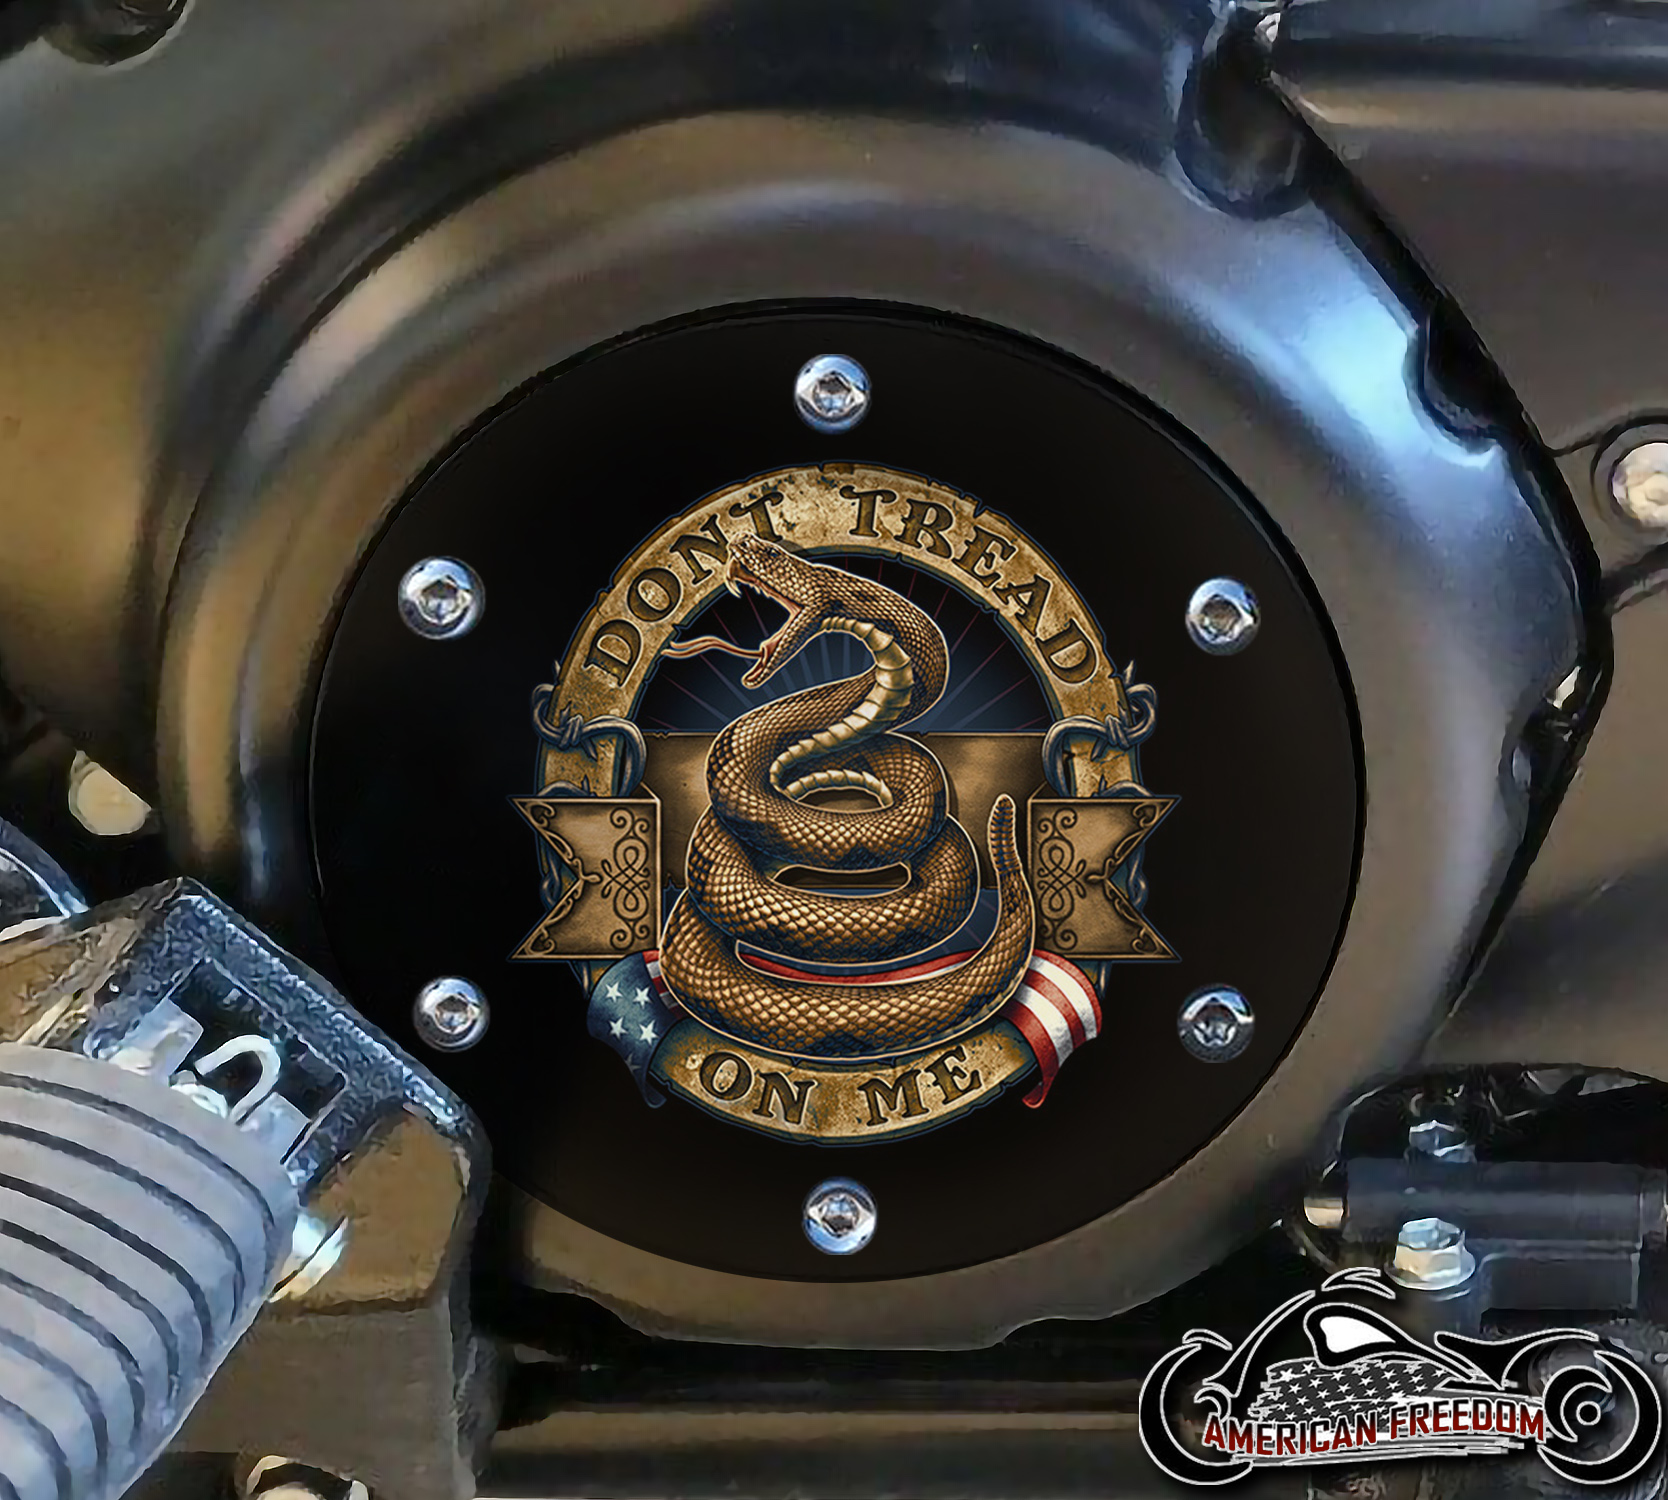 SUZUKI M109R Derby/Engine Cover - Don't Tread On Me Ribbons